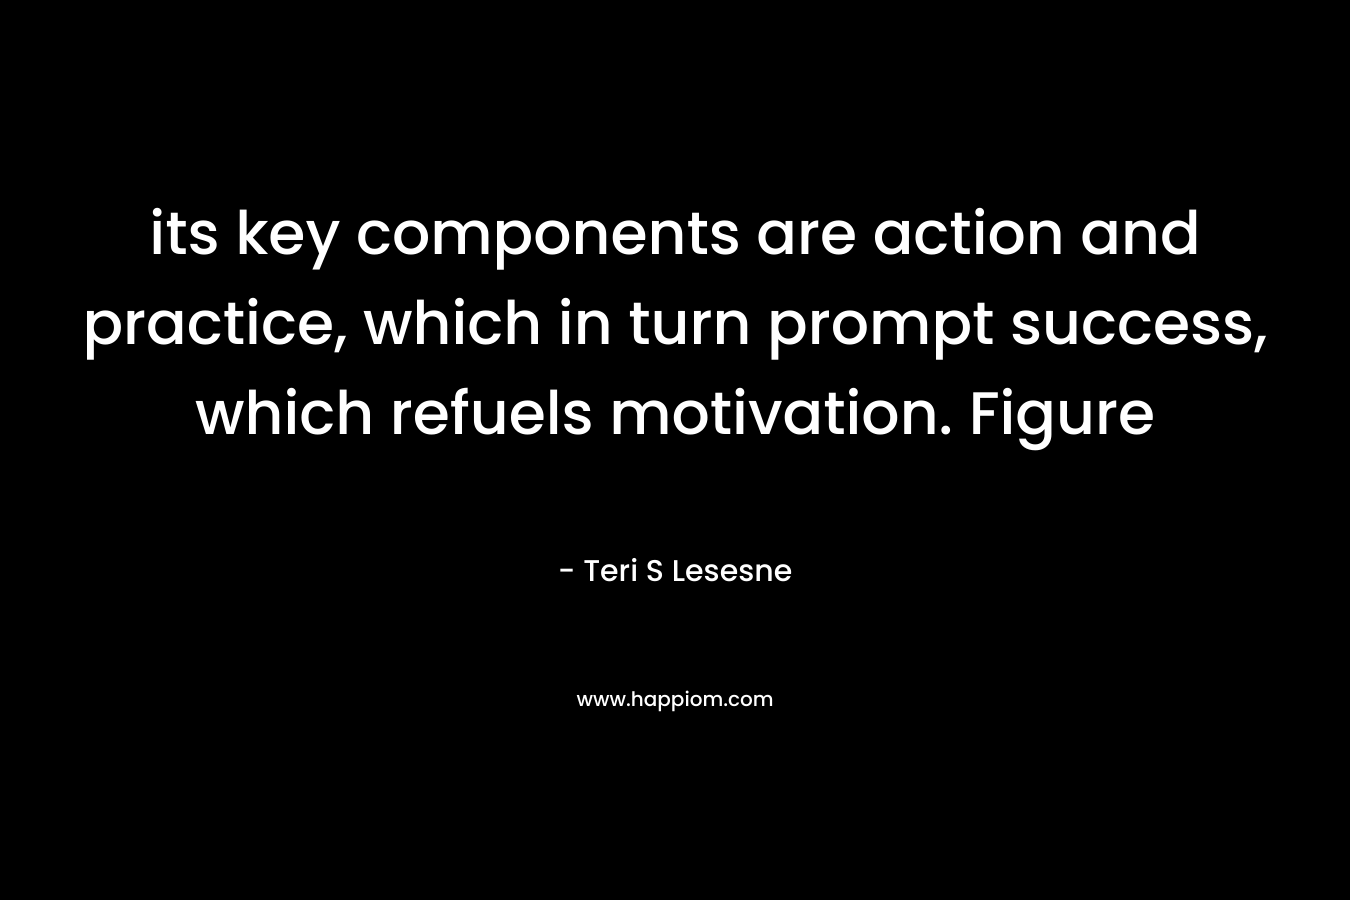 its key components are action and practice, which in turn prompt success, which refuels motivation. Figure – Teri S Lesesne